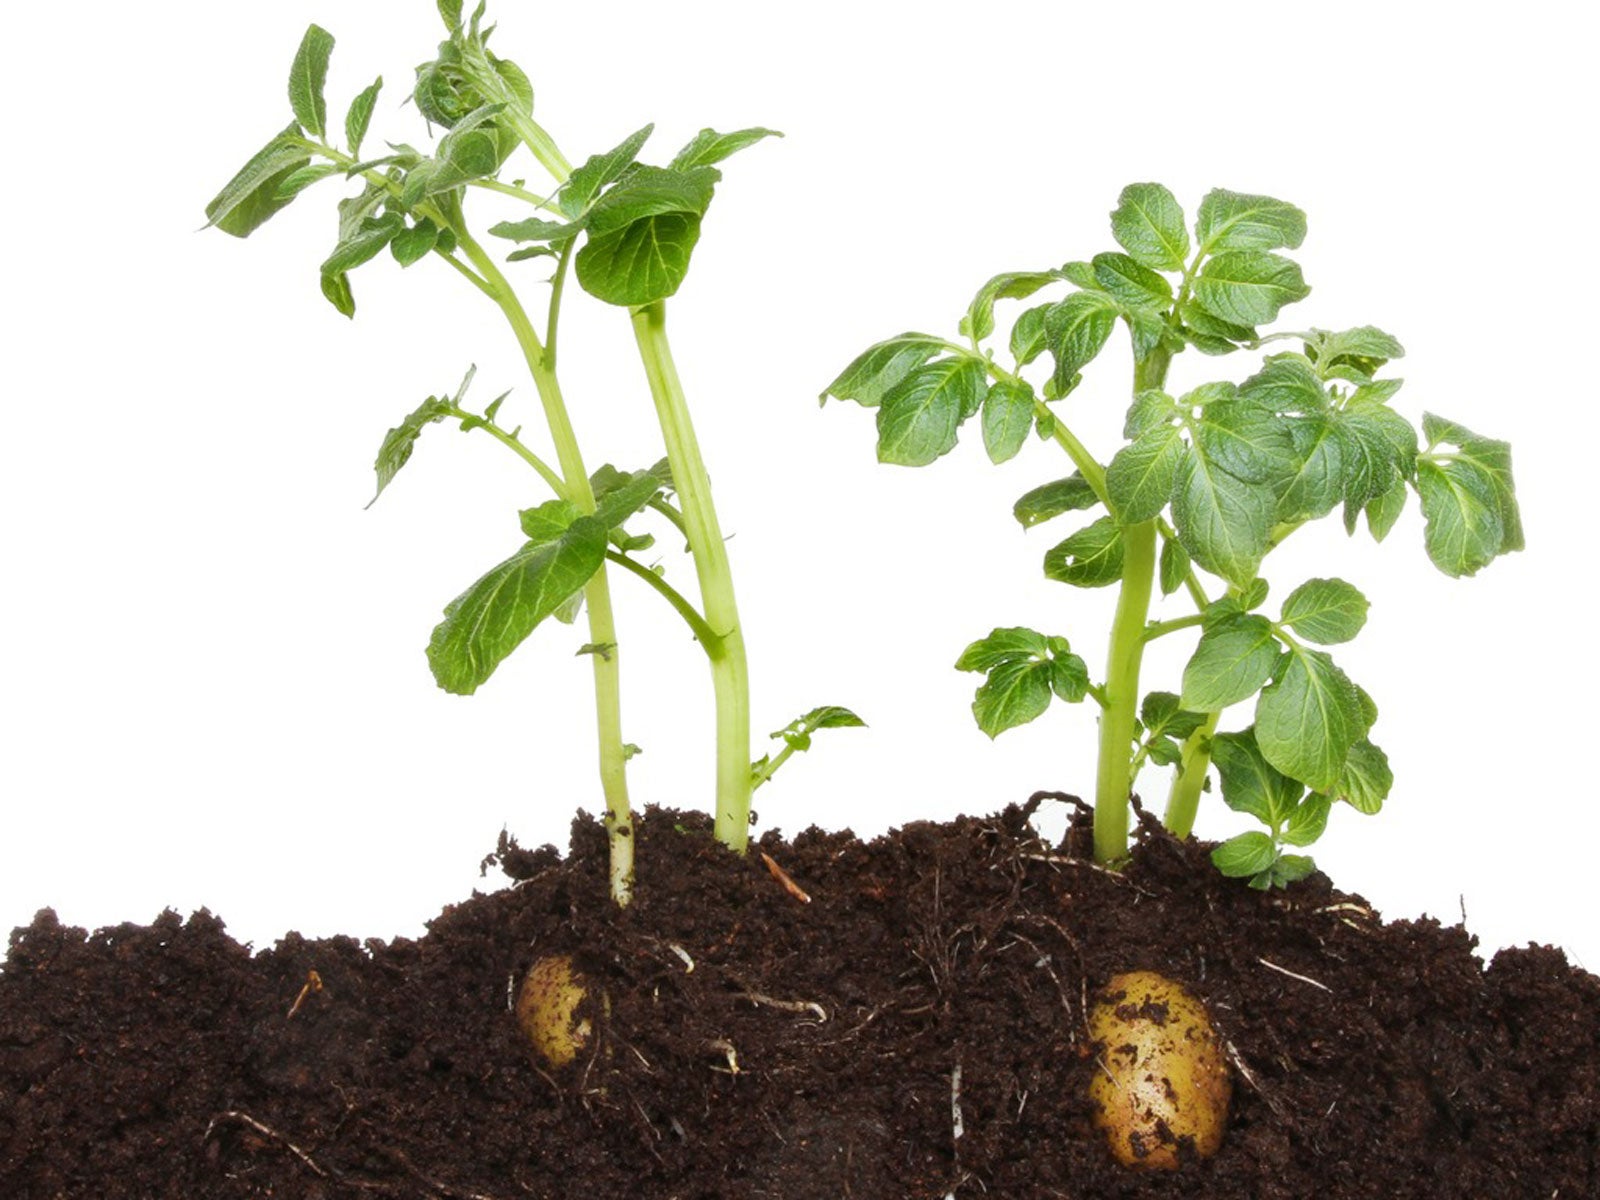 growing potatoes in compost – can you plant potatoes in compost alone